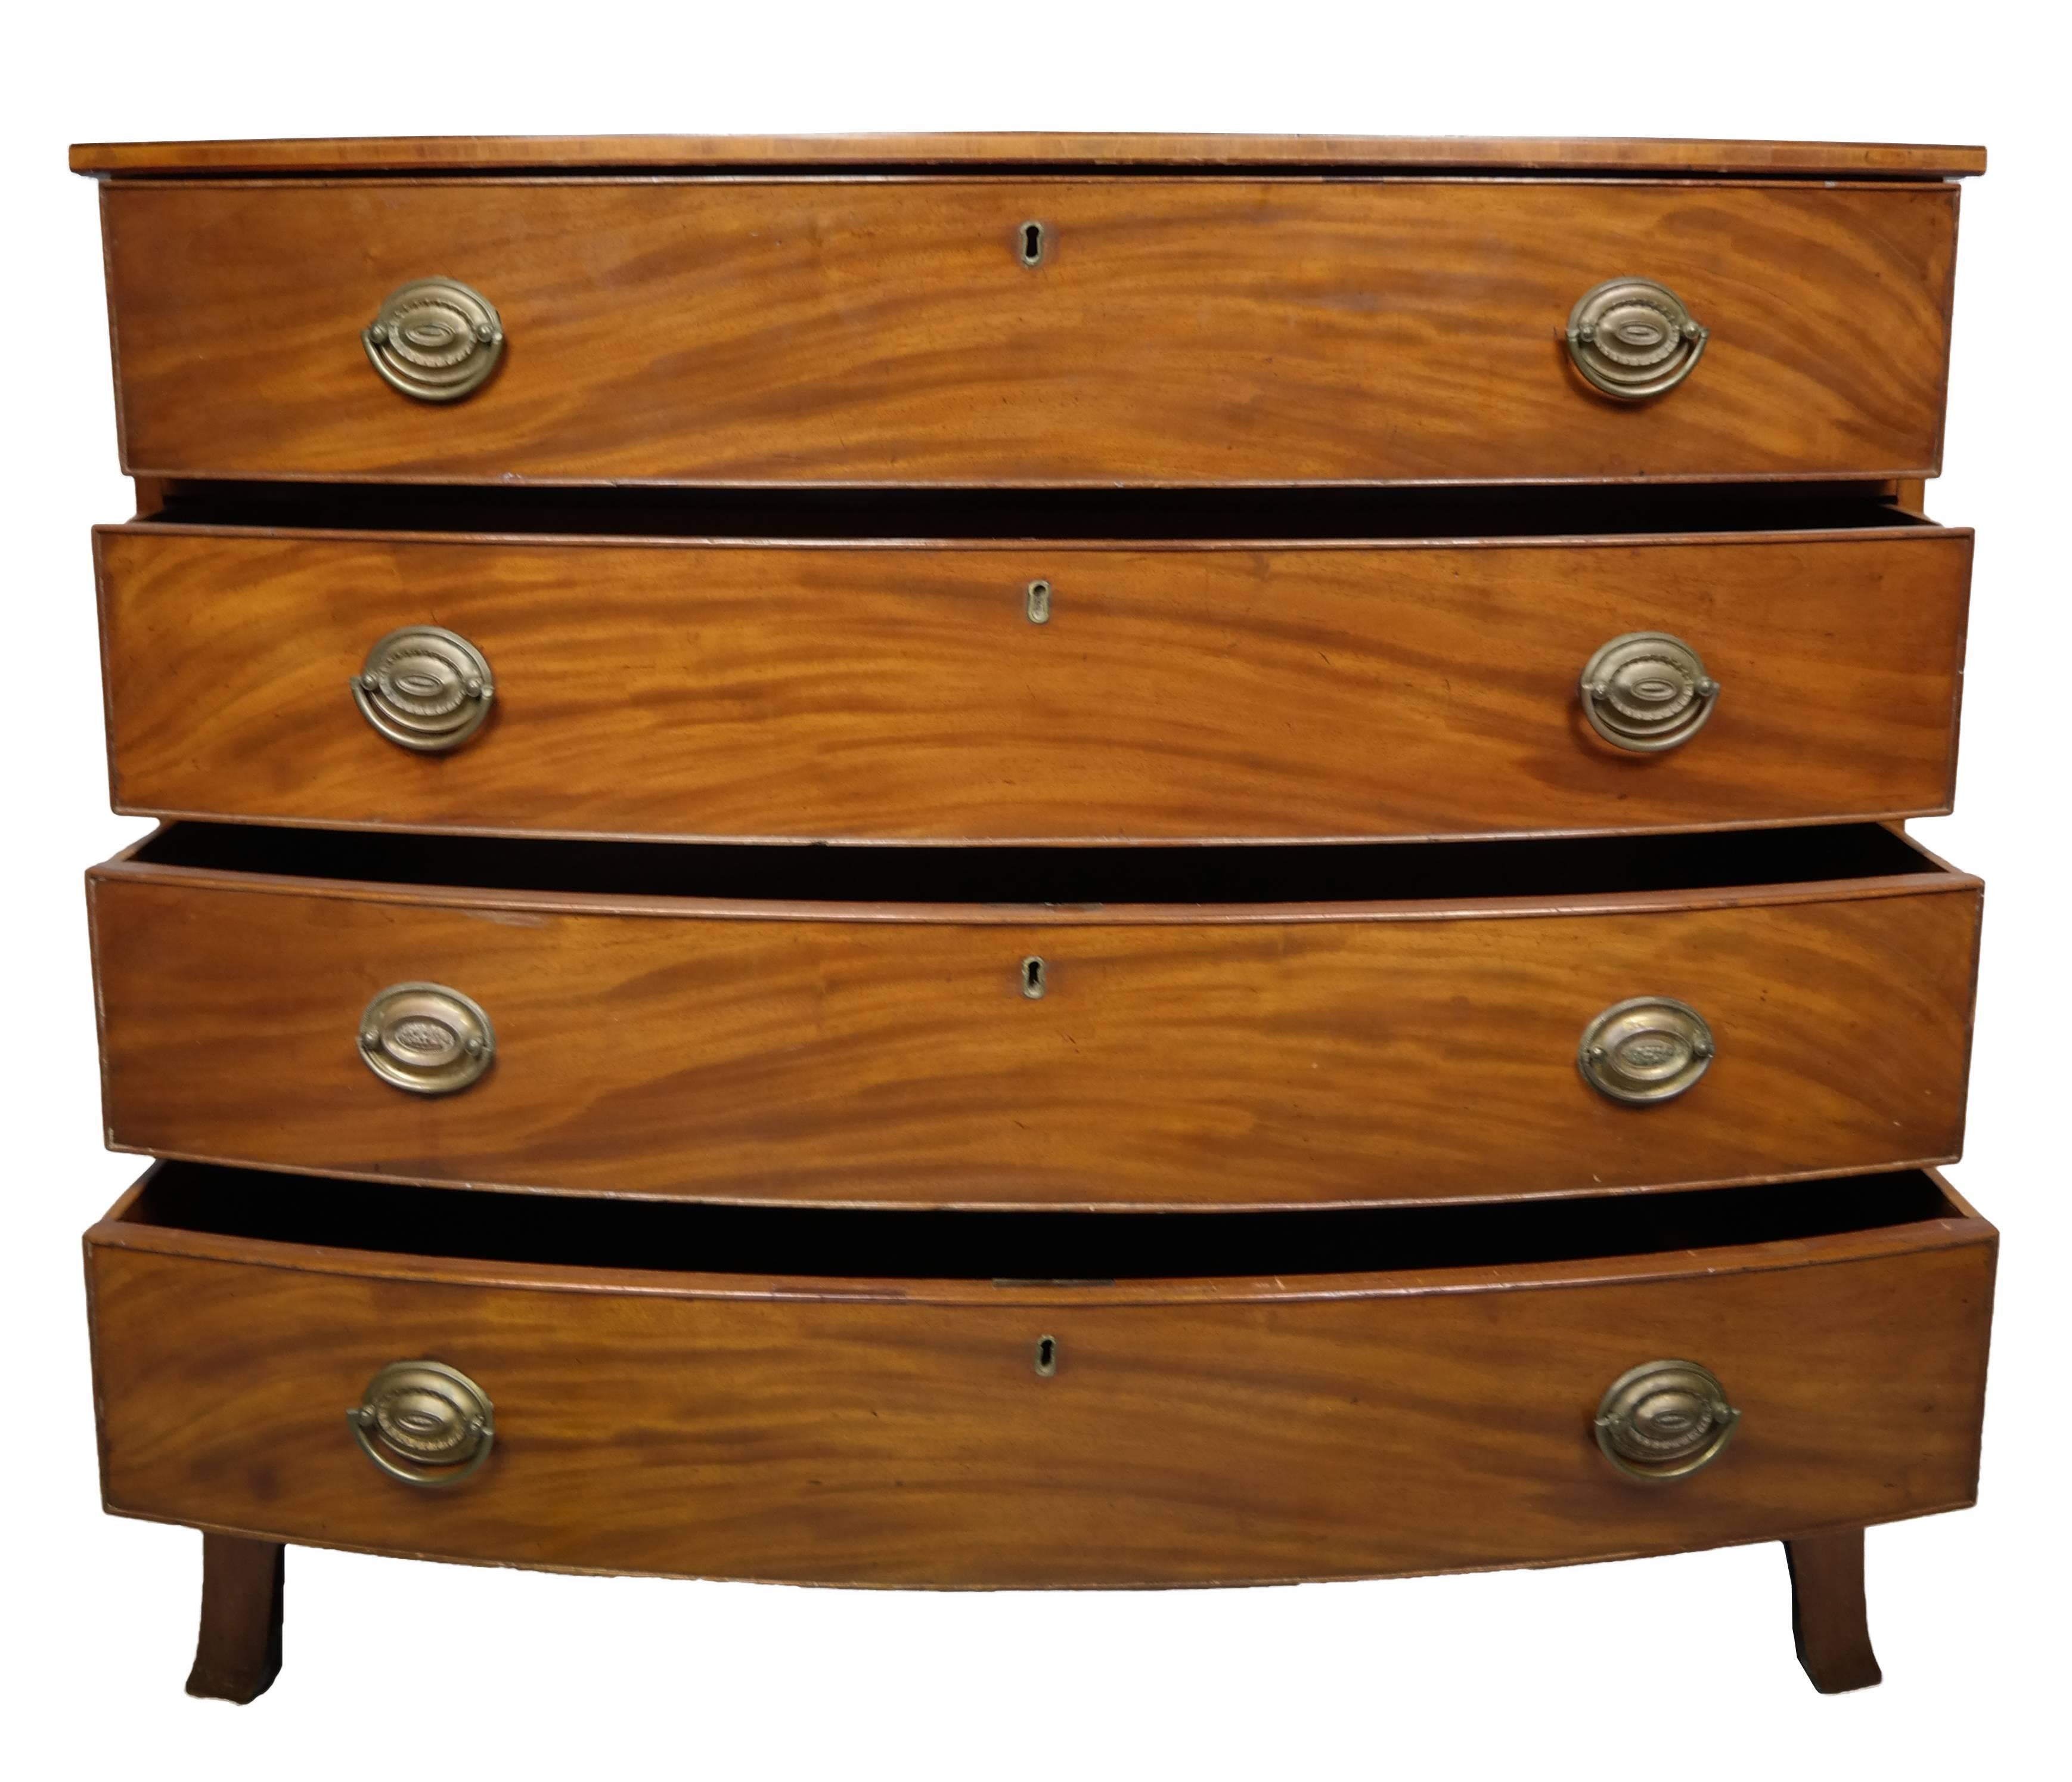 Late 18th Century American Mahogany Bowfront Chest of Drawers, circa 1790. 1